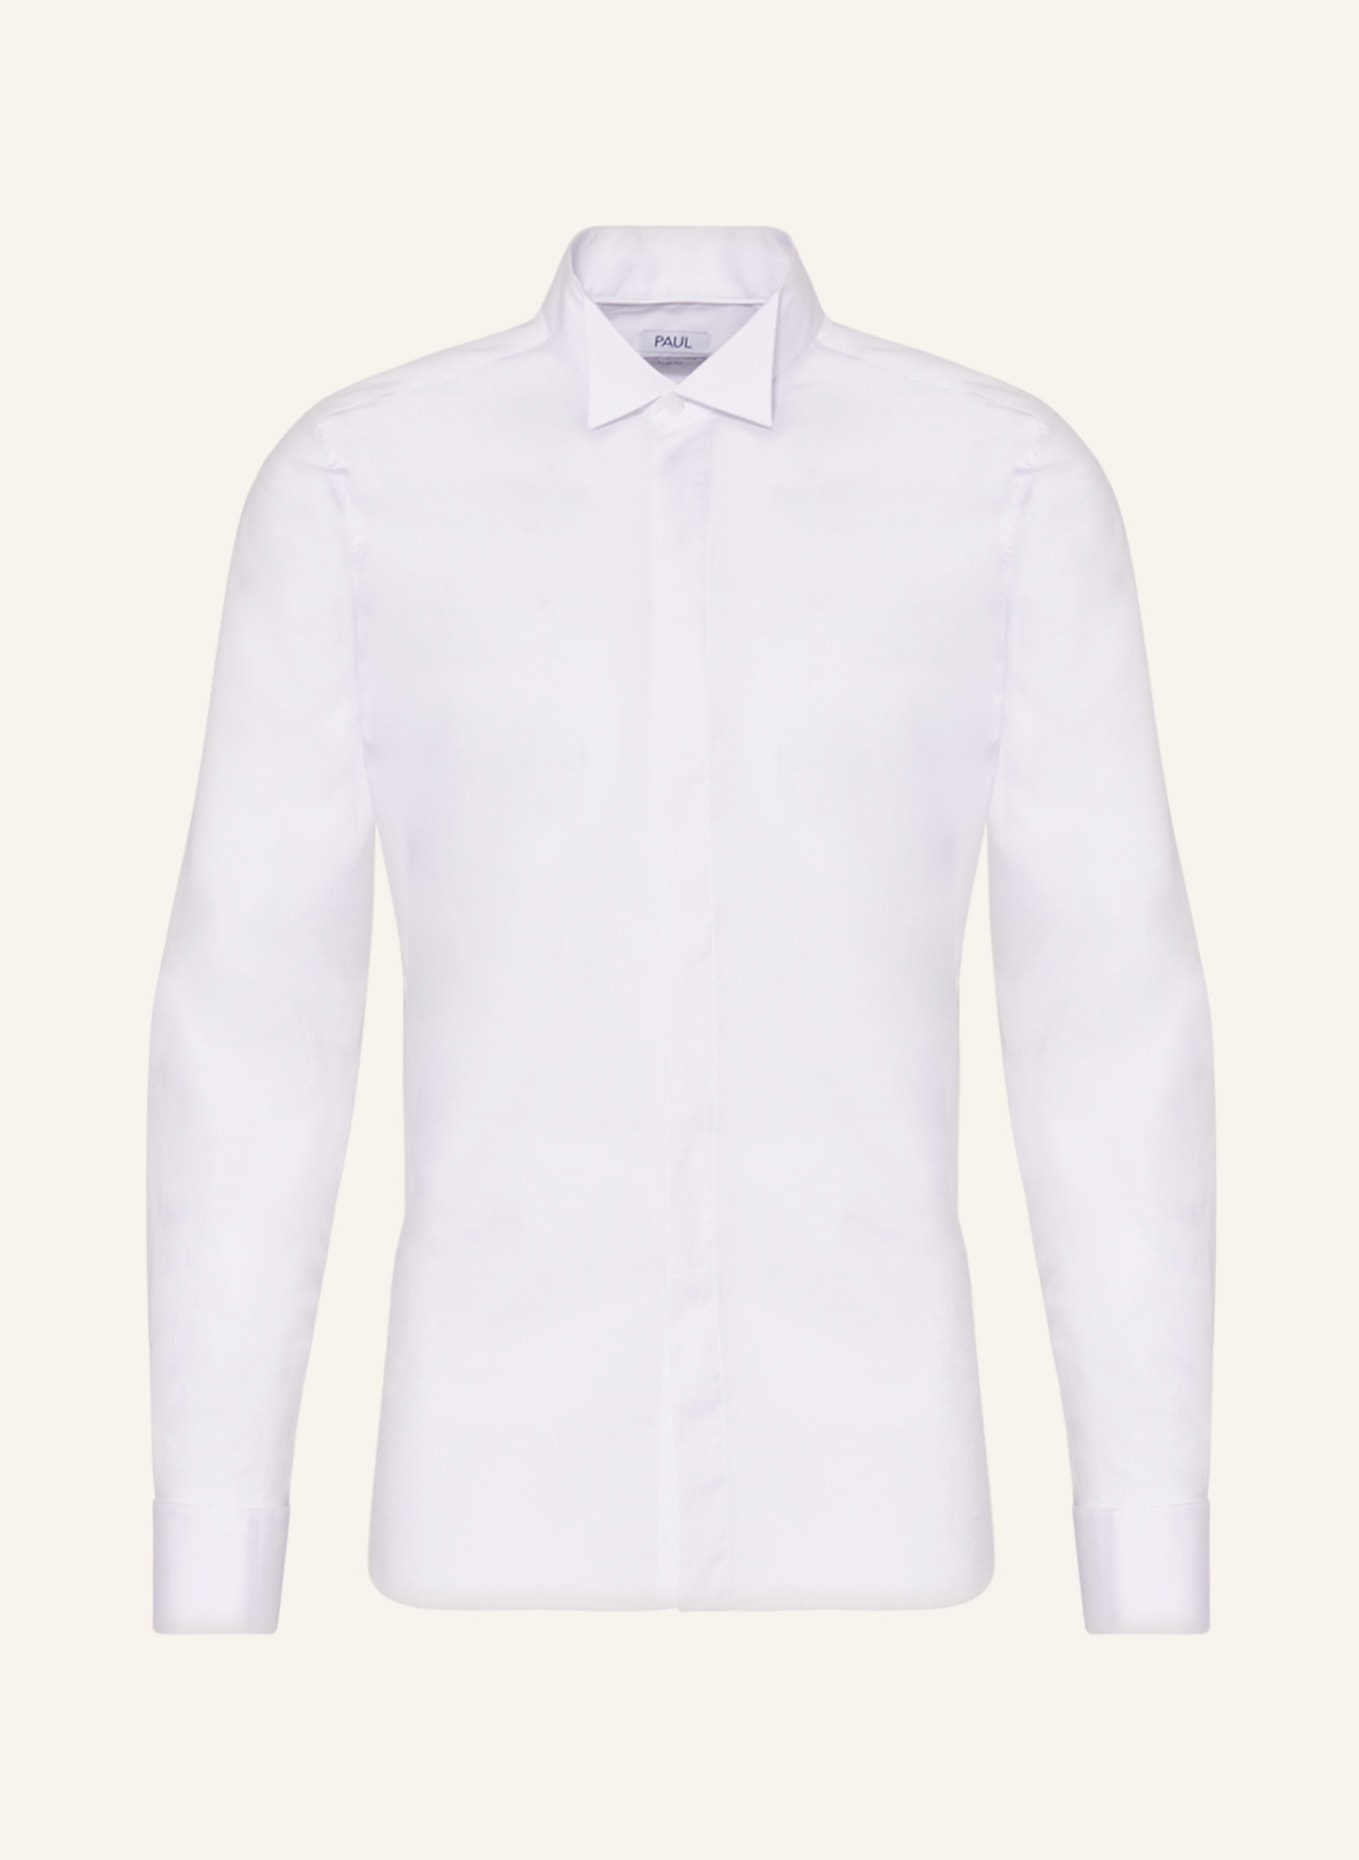 PAUL Tuxedo shirt GALA slim fit with French cuffs, Color: WHITE (Image 1)